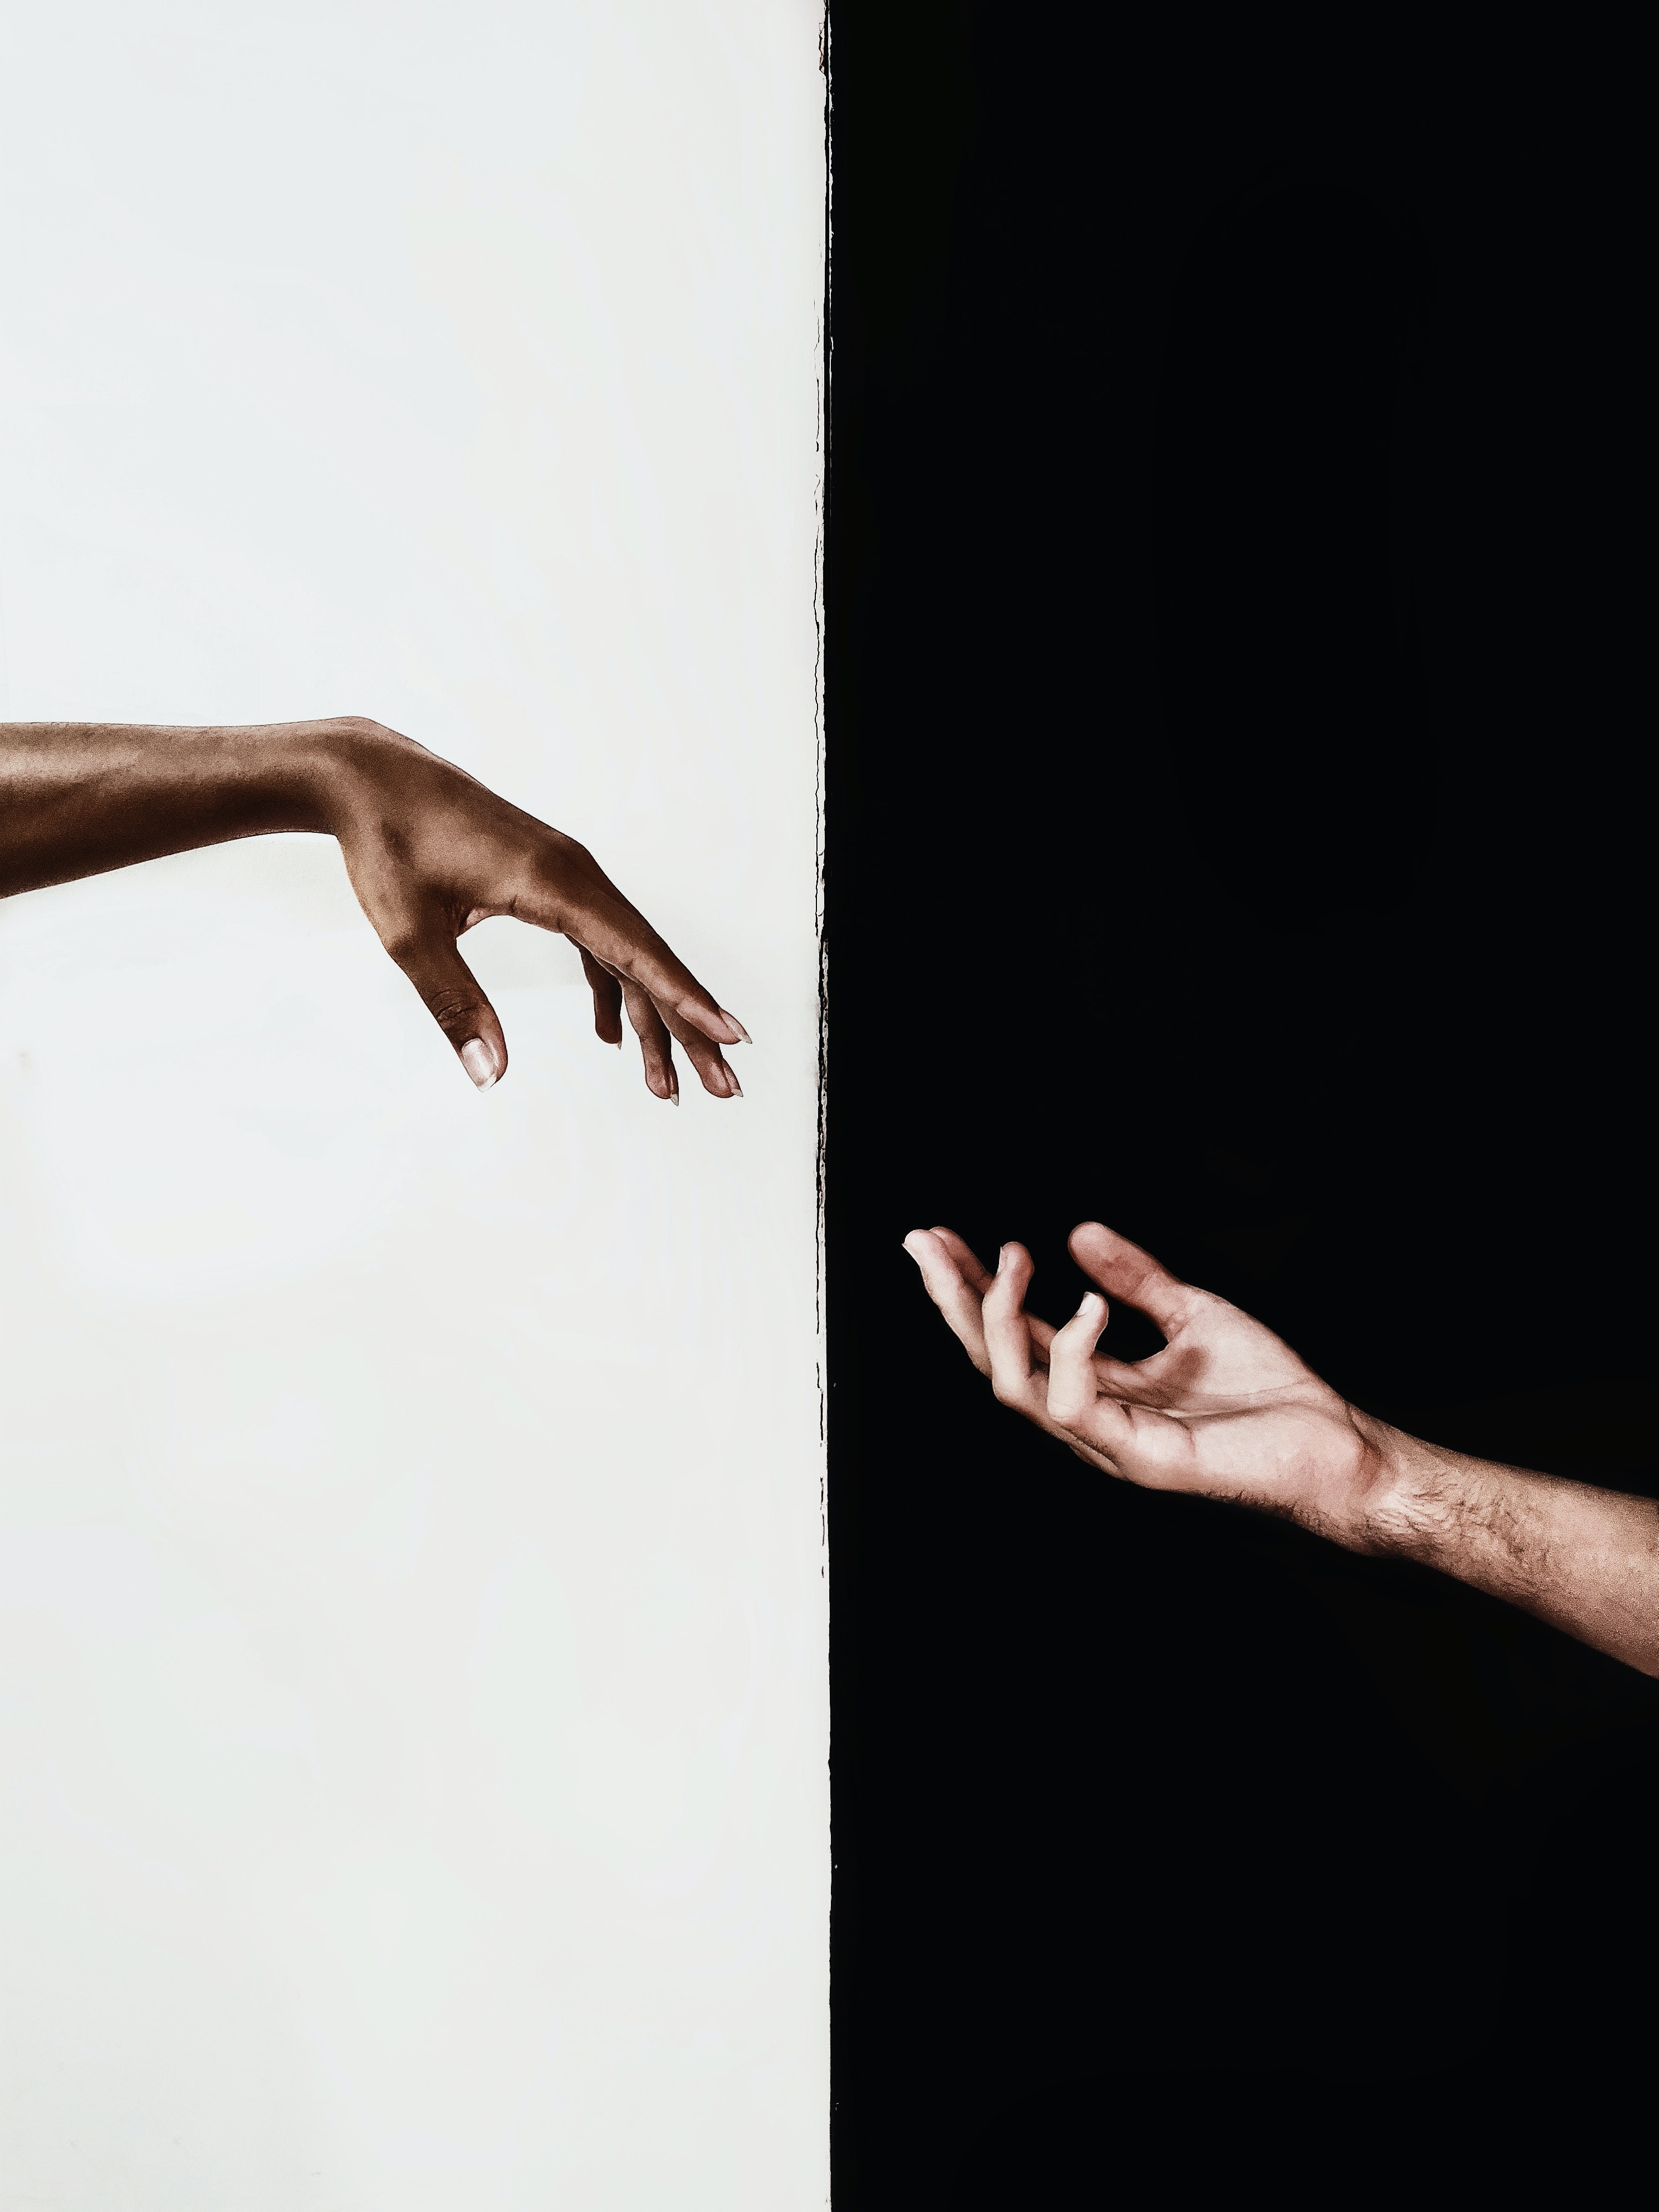 Two hands reaching for each other. Half the background is coloured black and the other half is white.